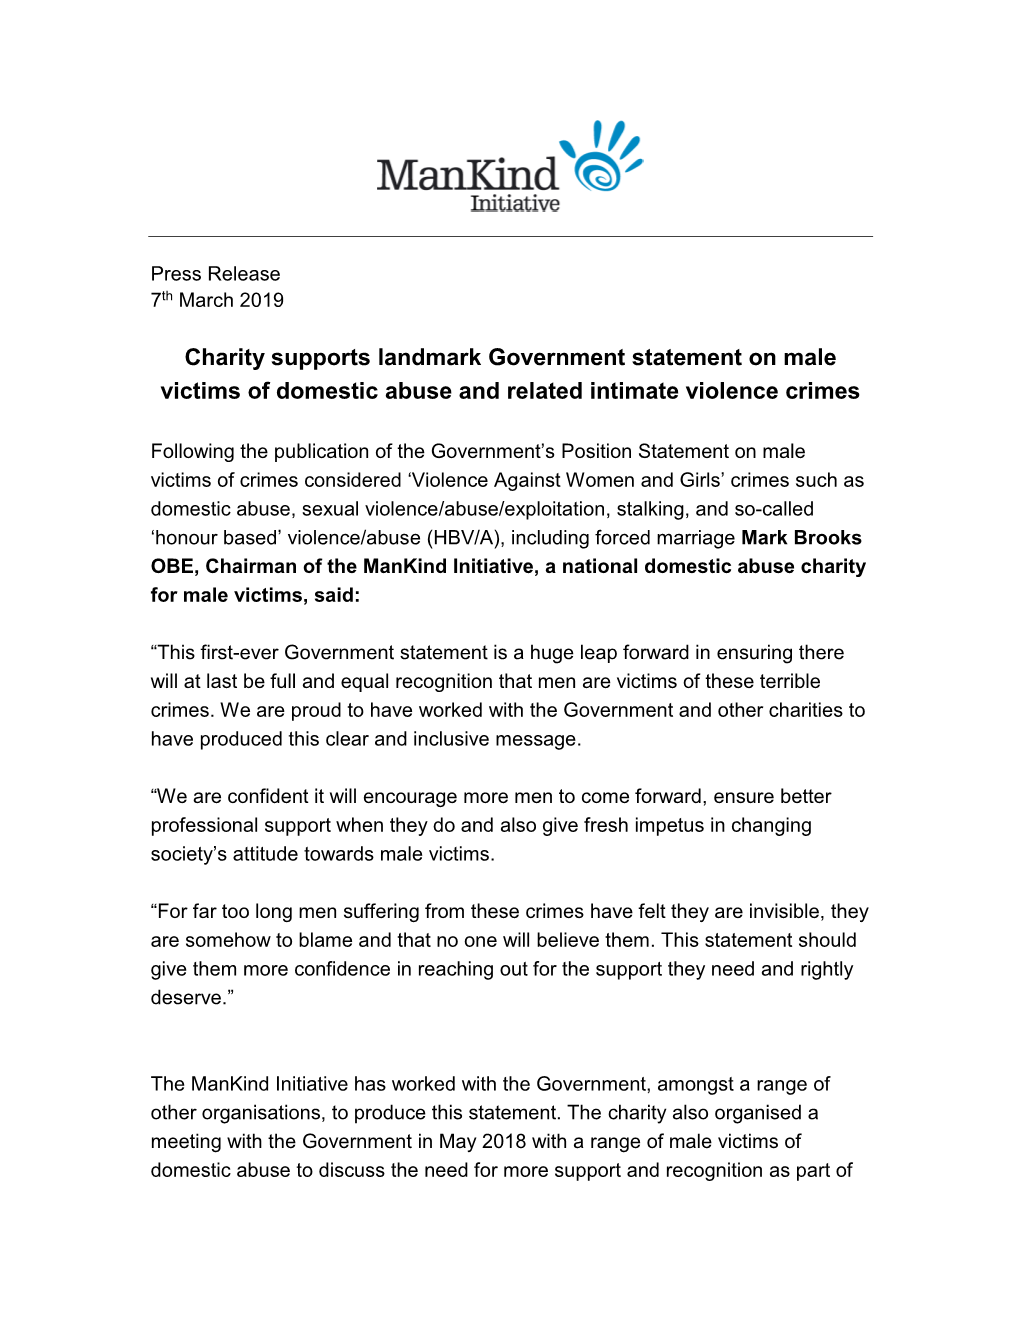 Charity Supports Landmark Government Statement on Male Victims of Domestic Abuse and Related Intimate Violence Crimes